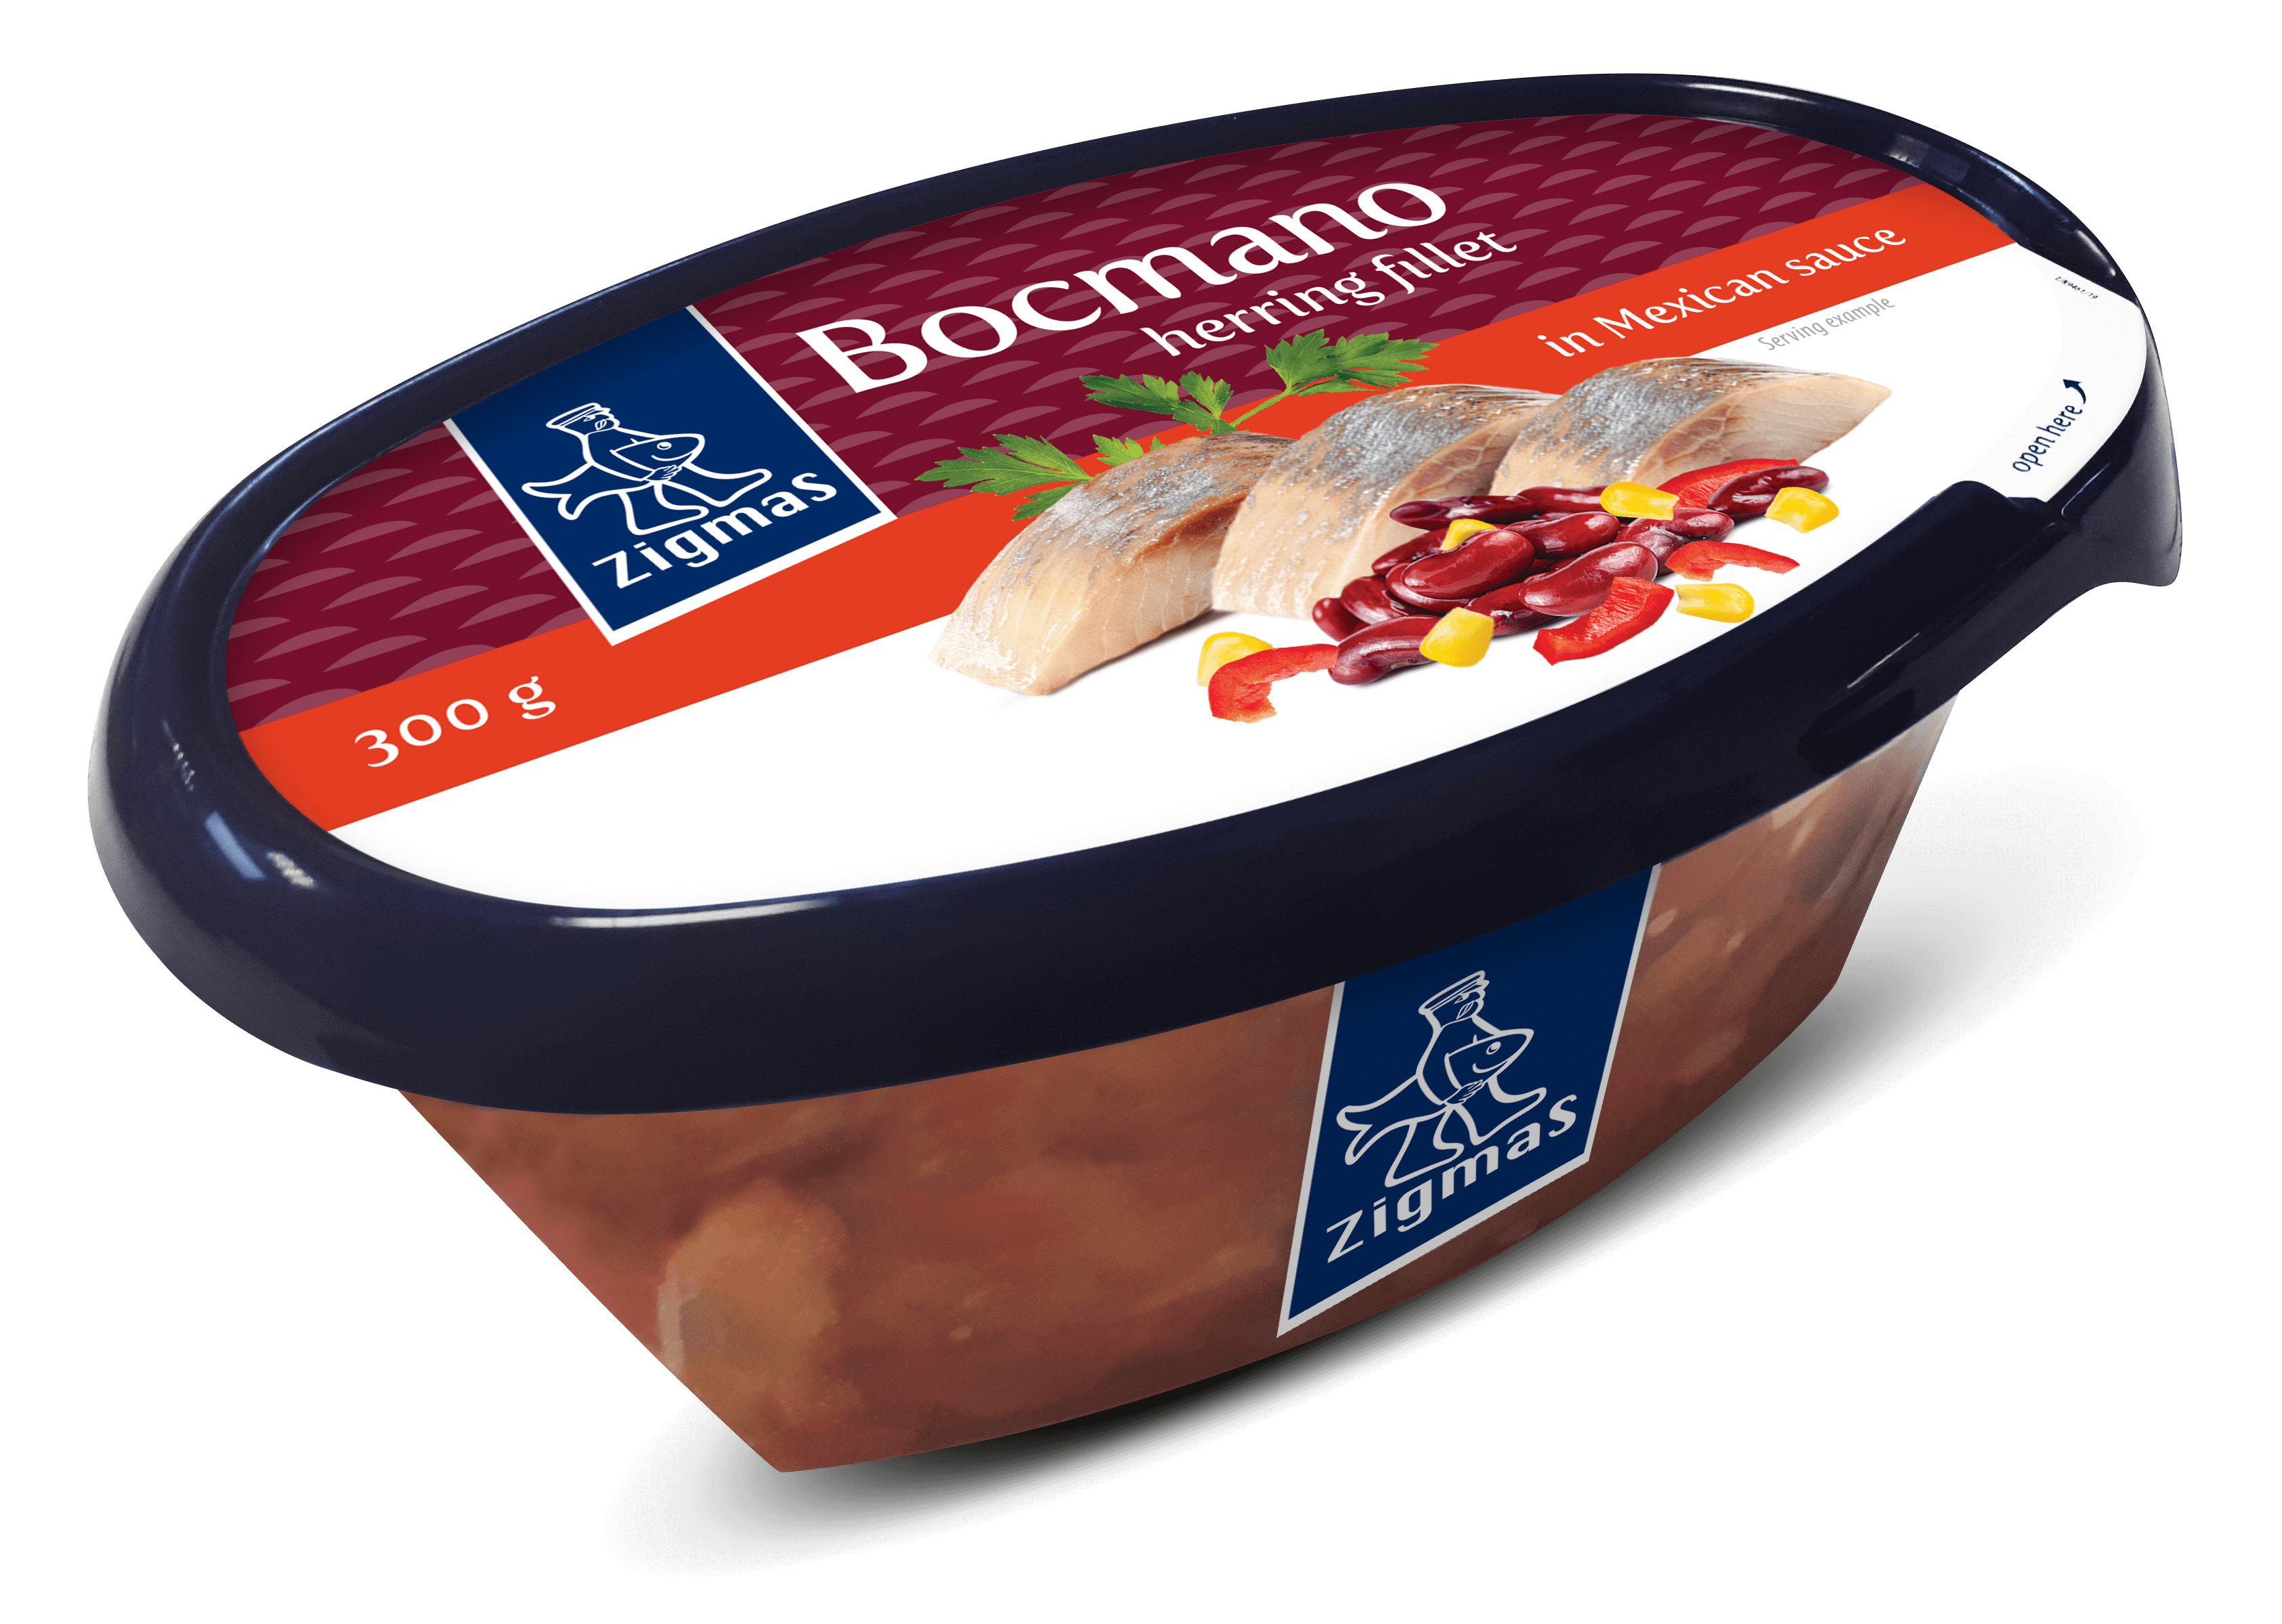 BOCMANO pickled herring fillet in Mexican sauce